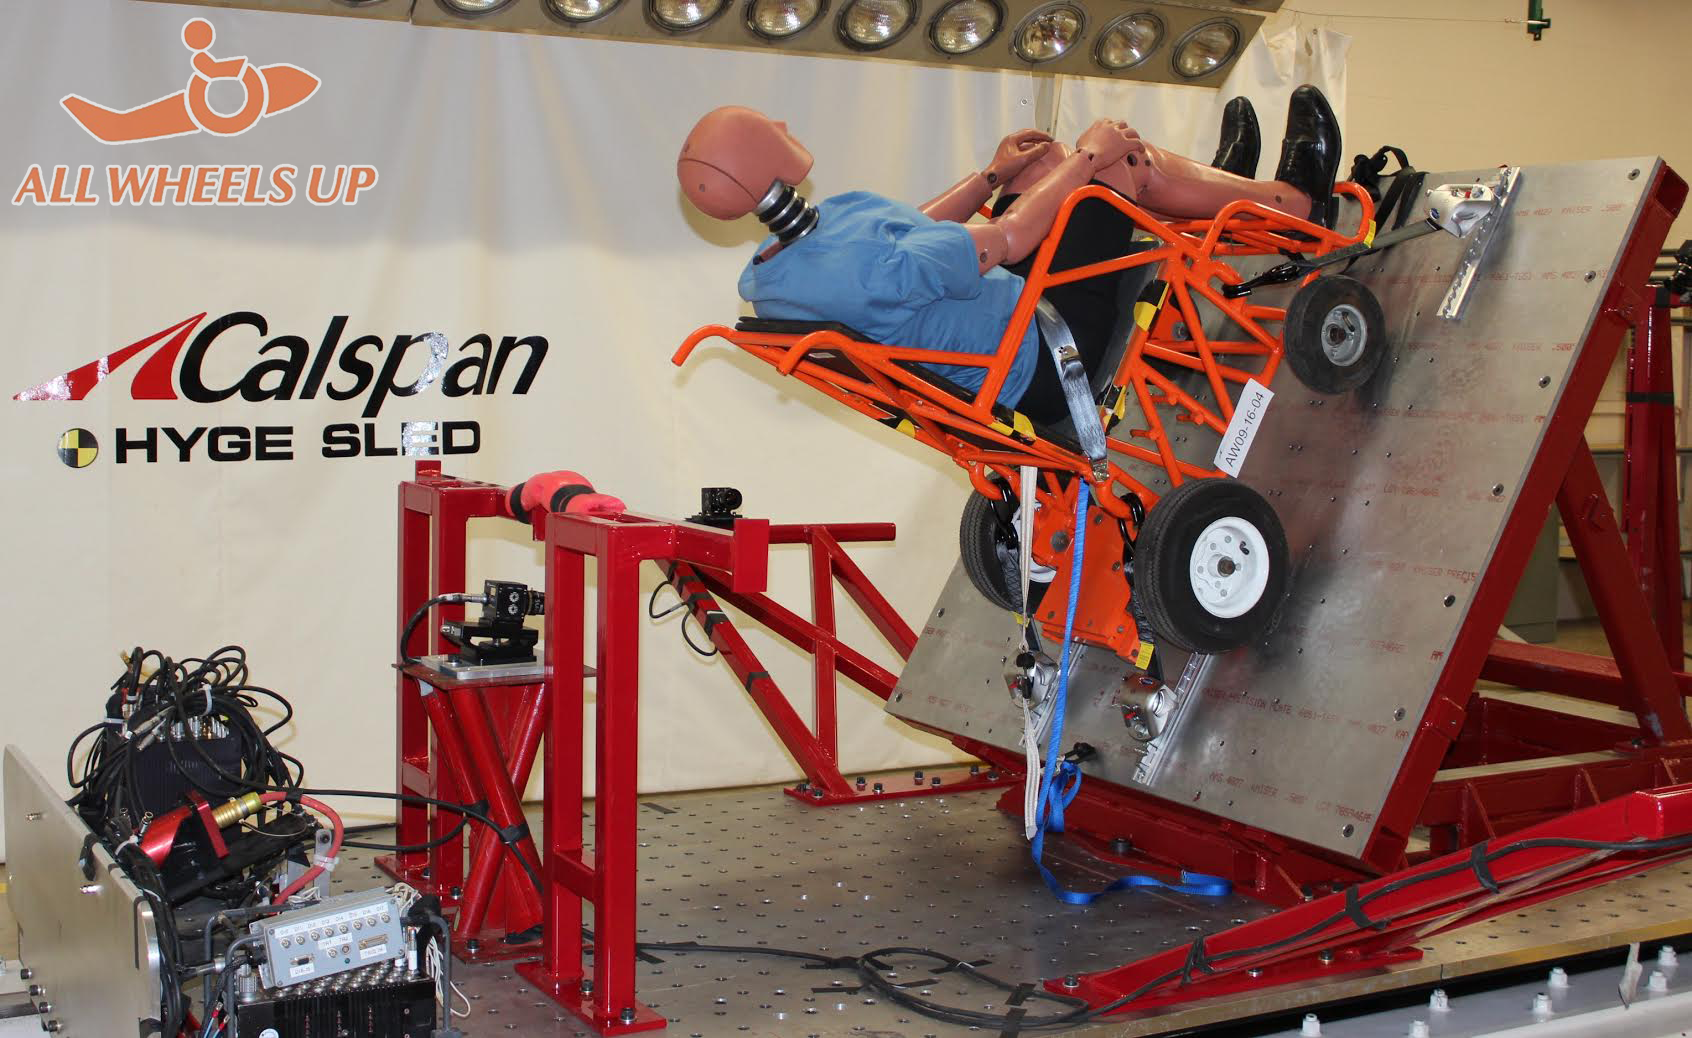 A wheelchair crash test conducted by All Wheels Up.